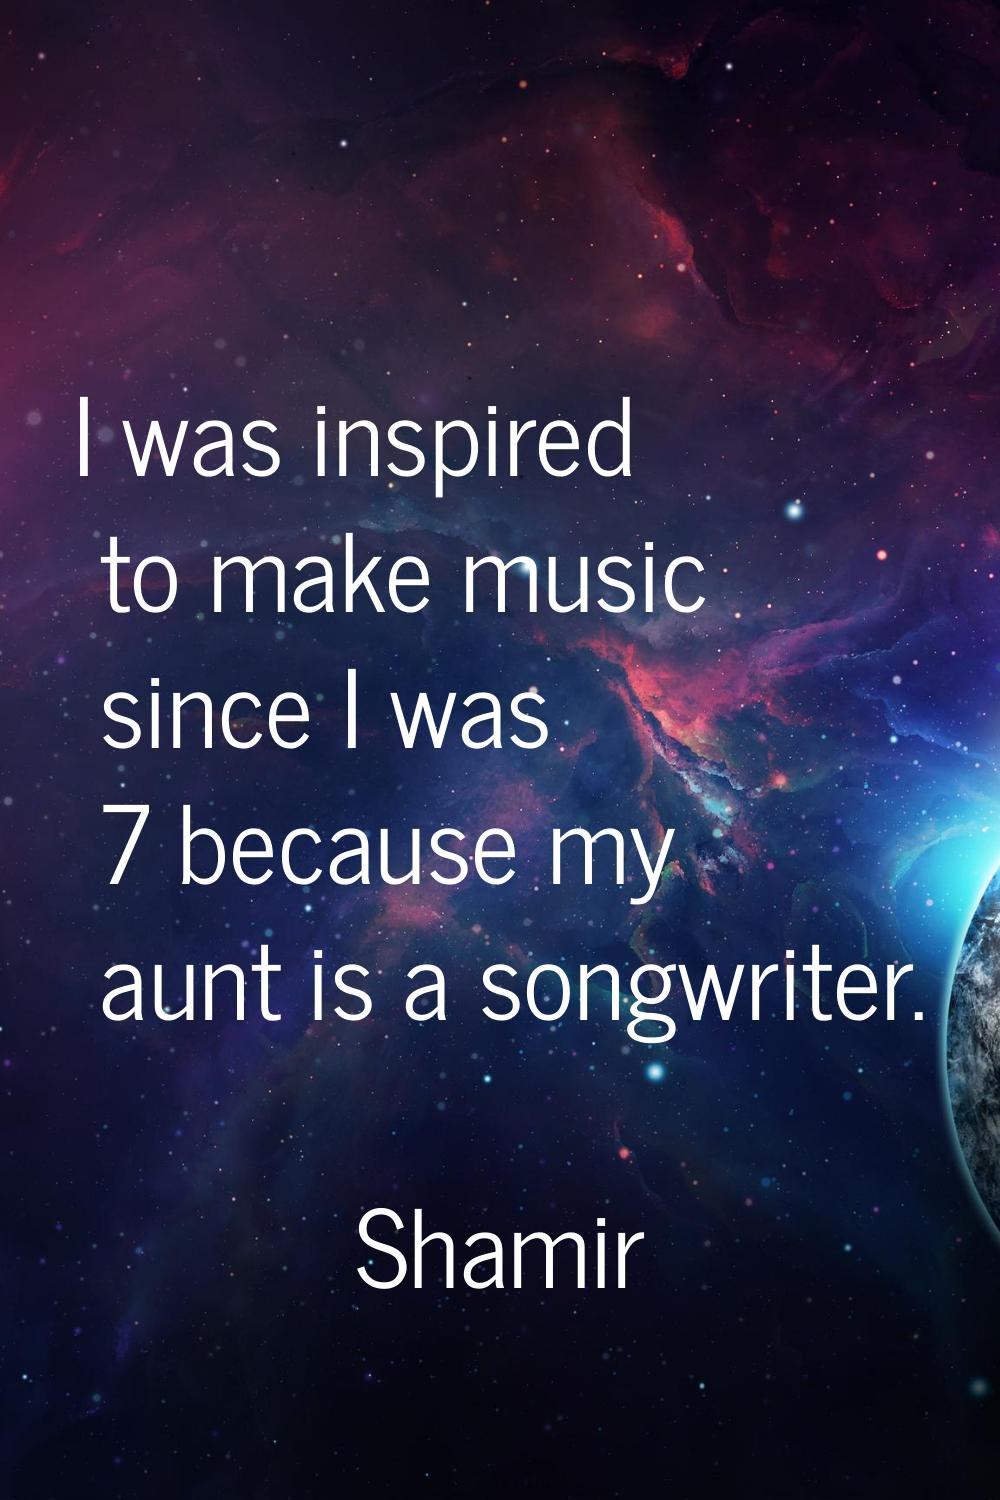 I was inspired to make music since I was 7 because my aunt is a songwriter.